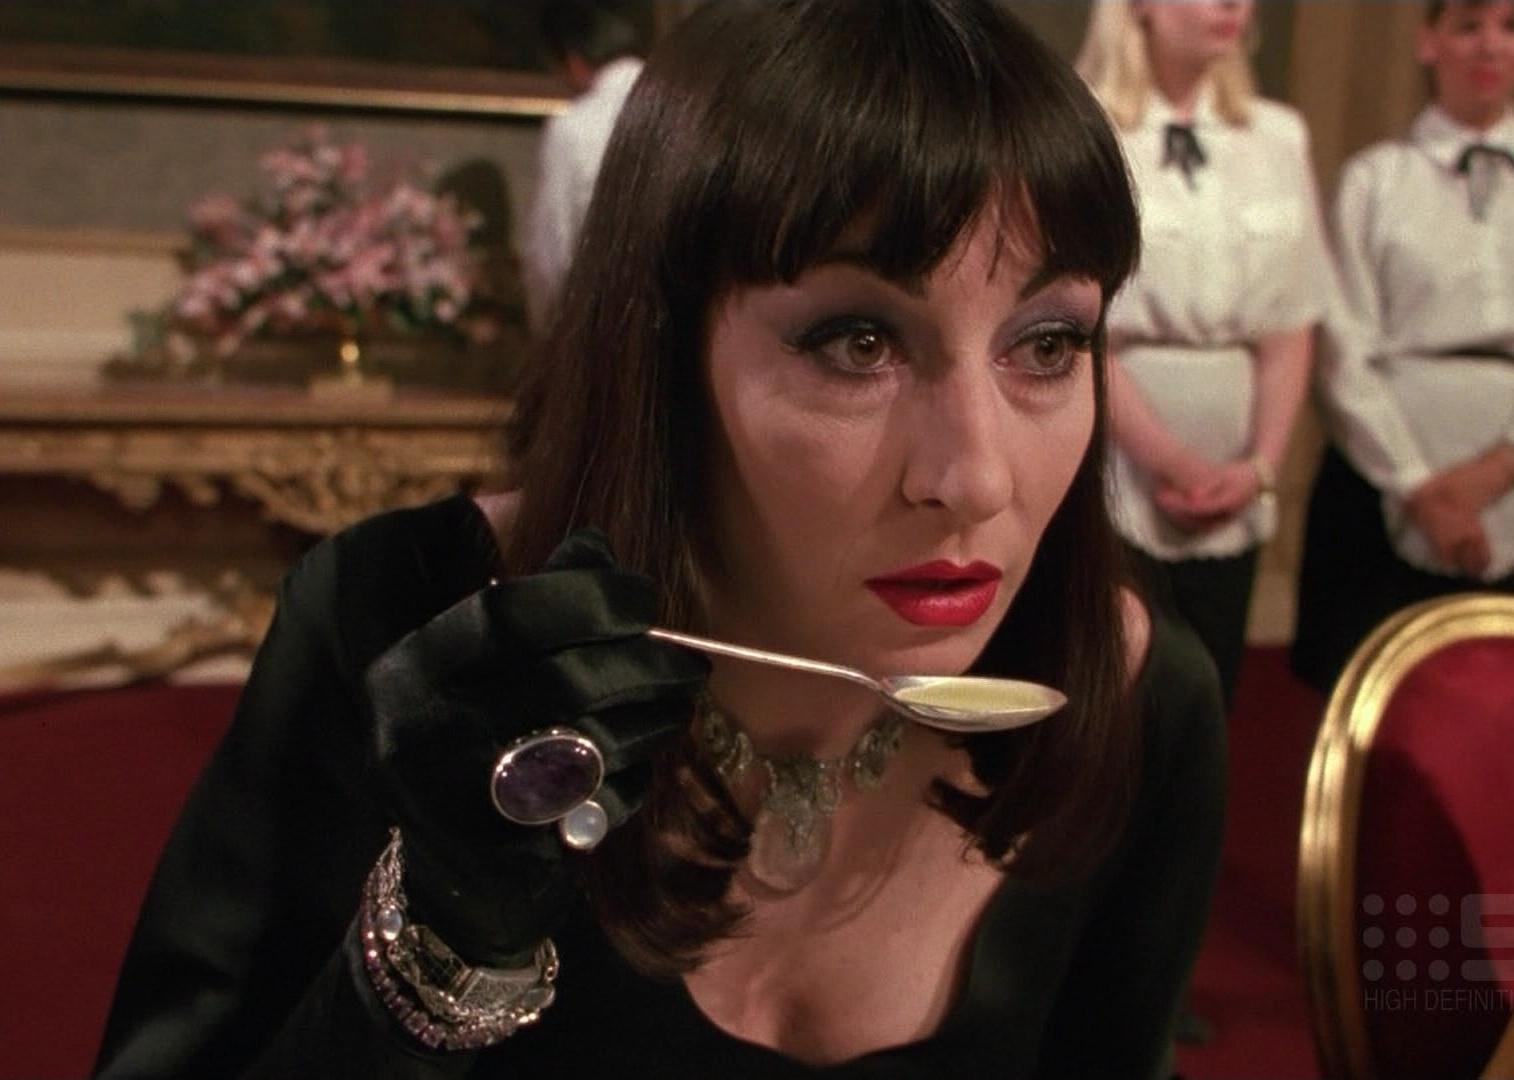 Anjelica Huston leaning in to taste from a spoon in a formal dining room.